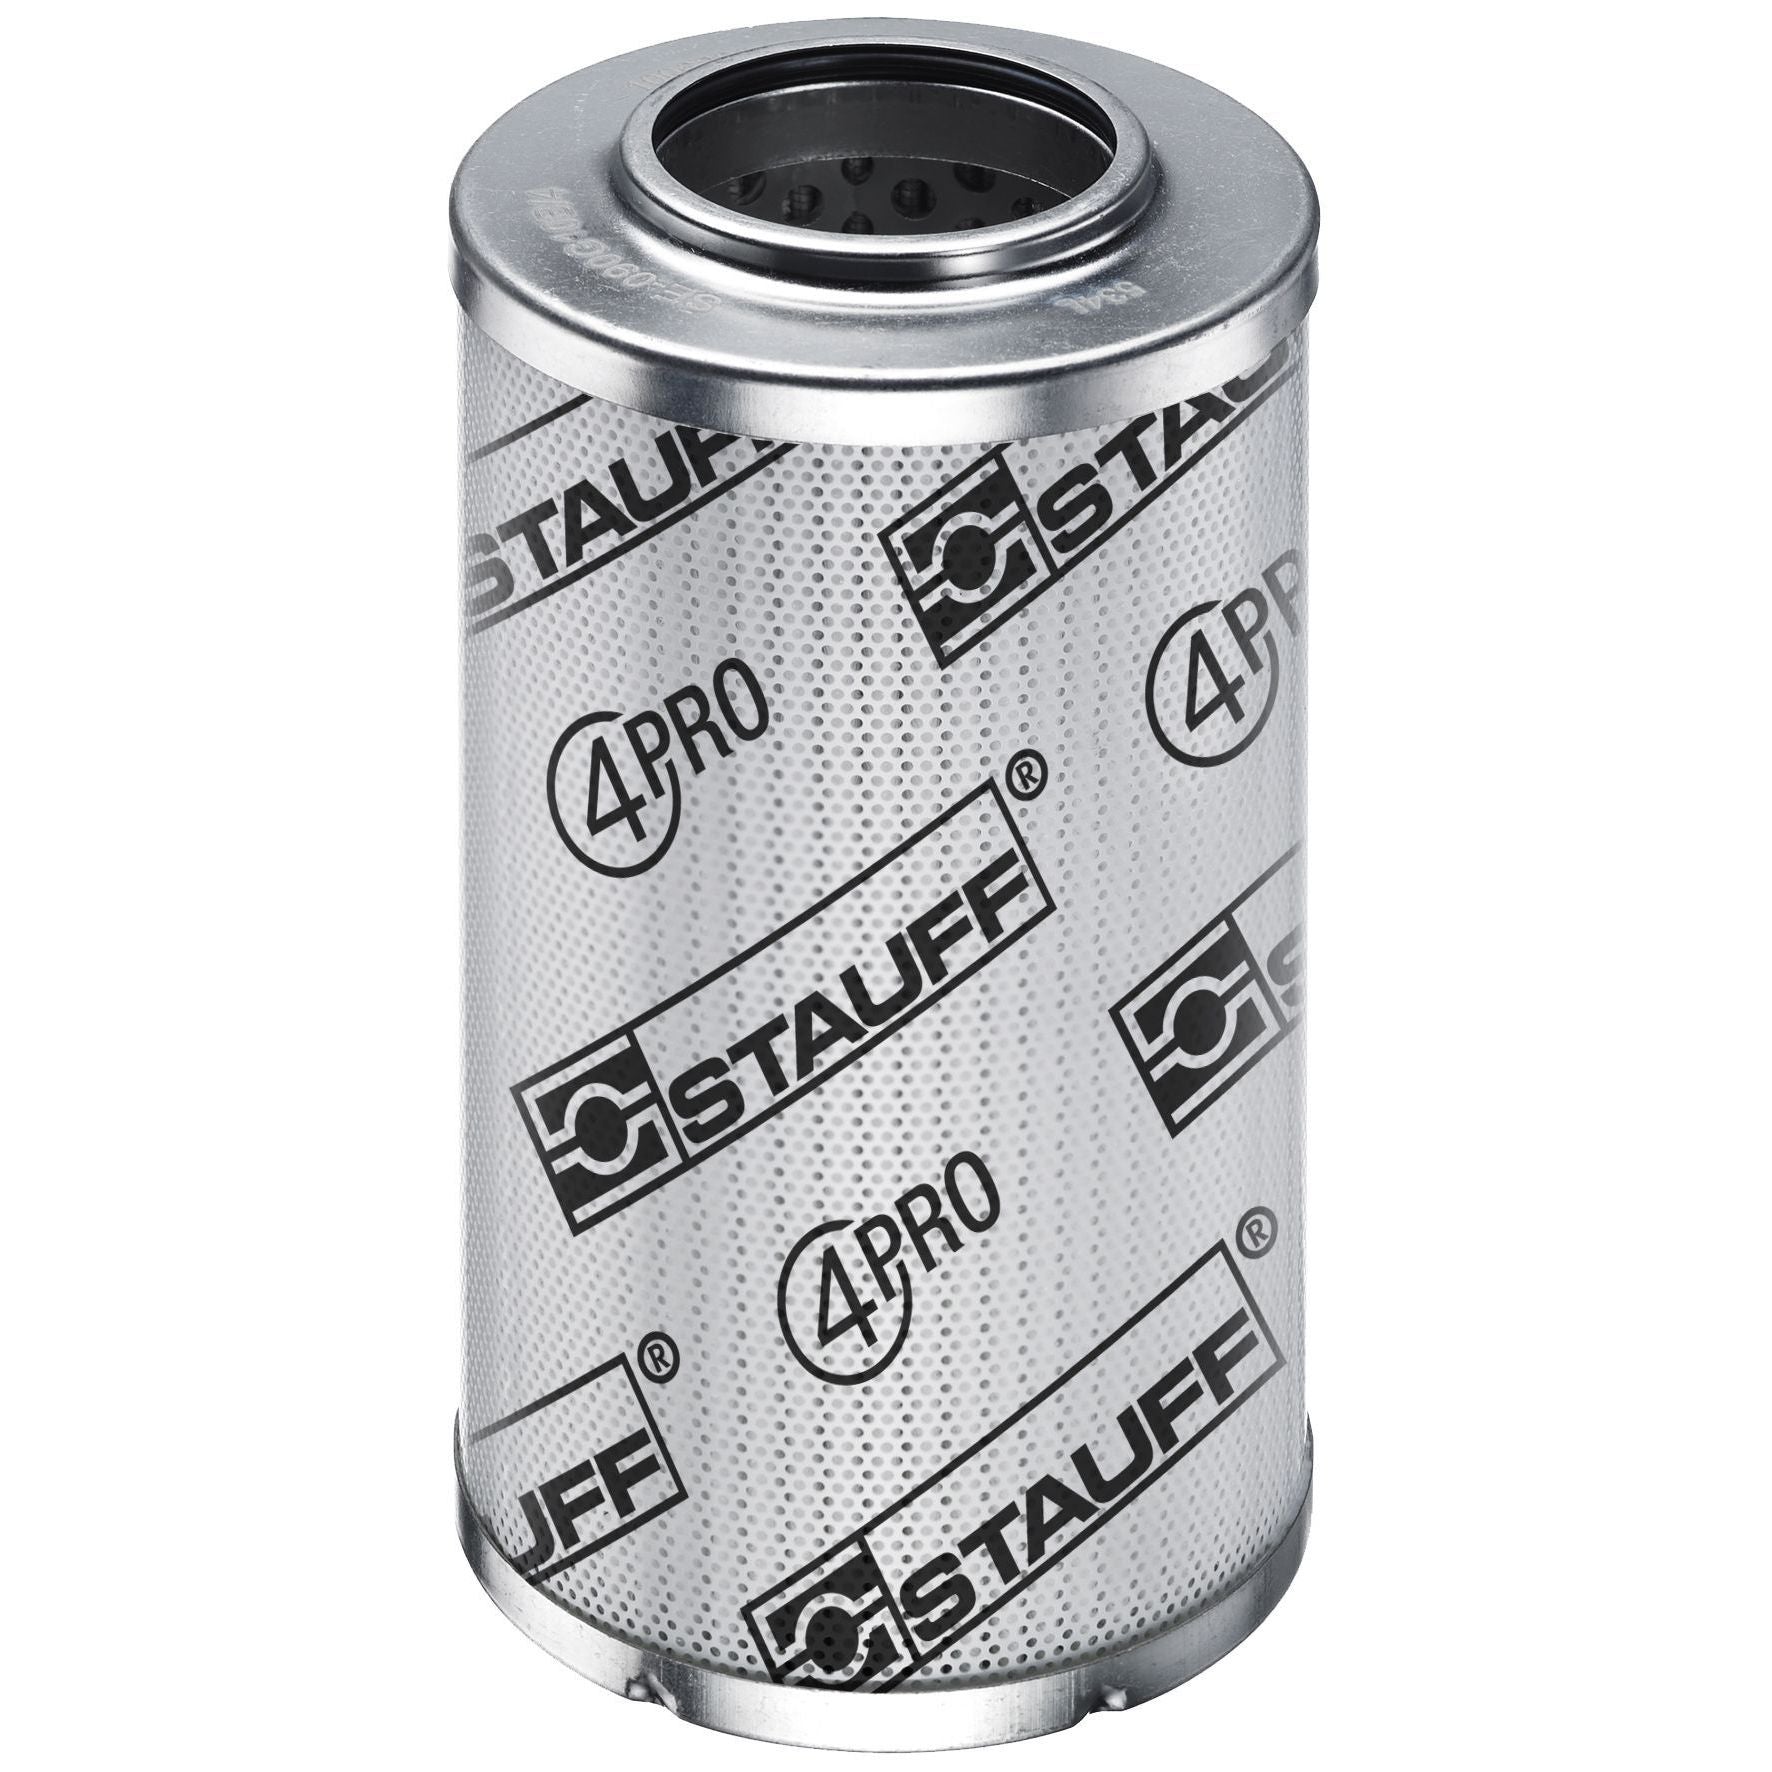 SE-160-H-20-B/4 : Stauff SF-160 Series Filter Element, 20 Micron, Synthetic, 3045psi Collapse Differential, Buna